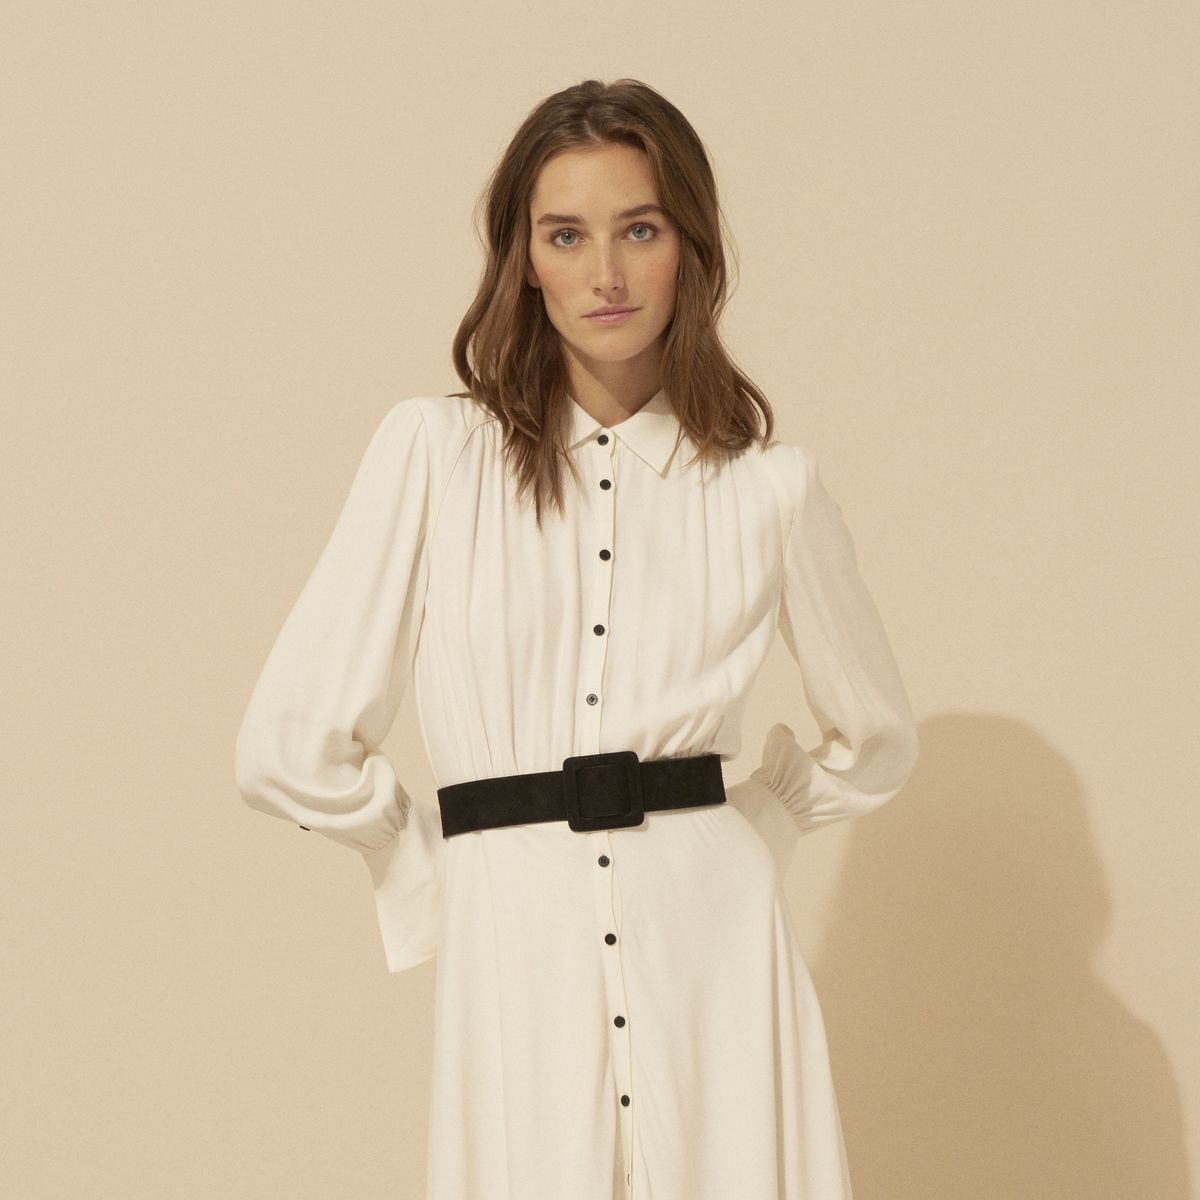 15 Long-Sleeve Wedding Guest Dresses That Are Totally Sexy